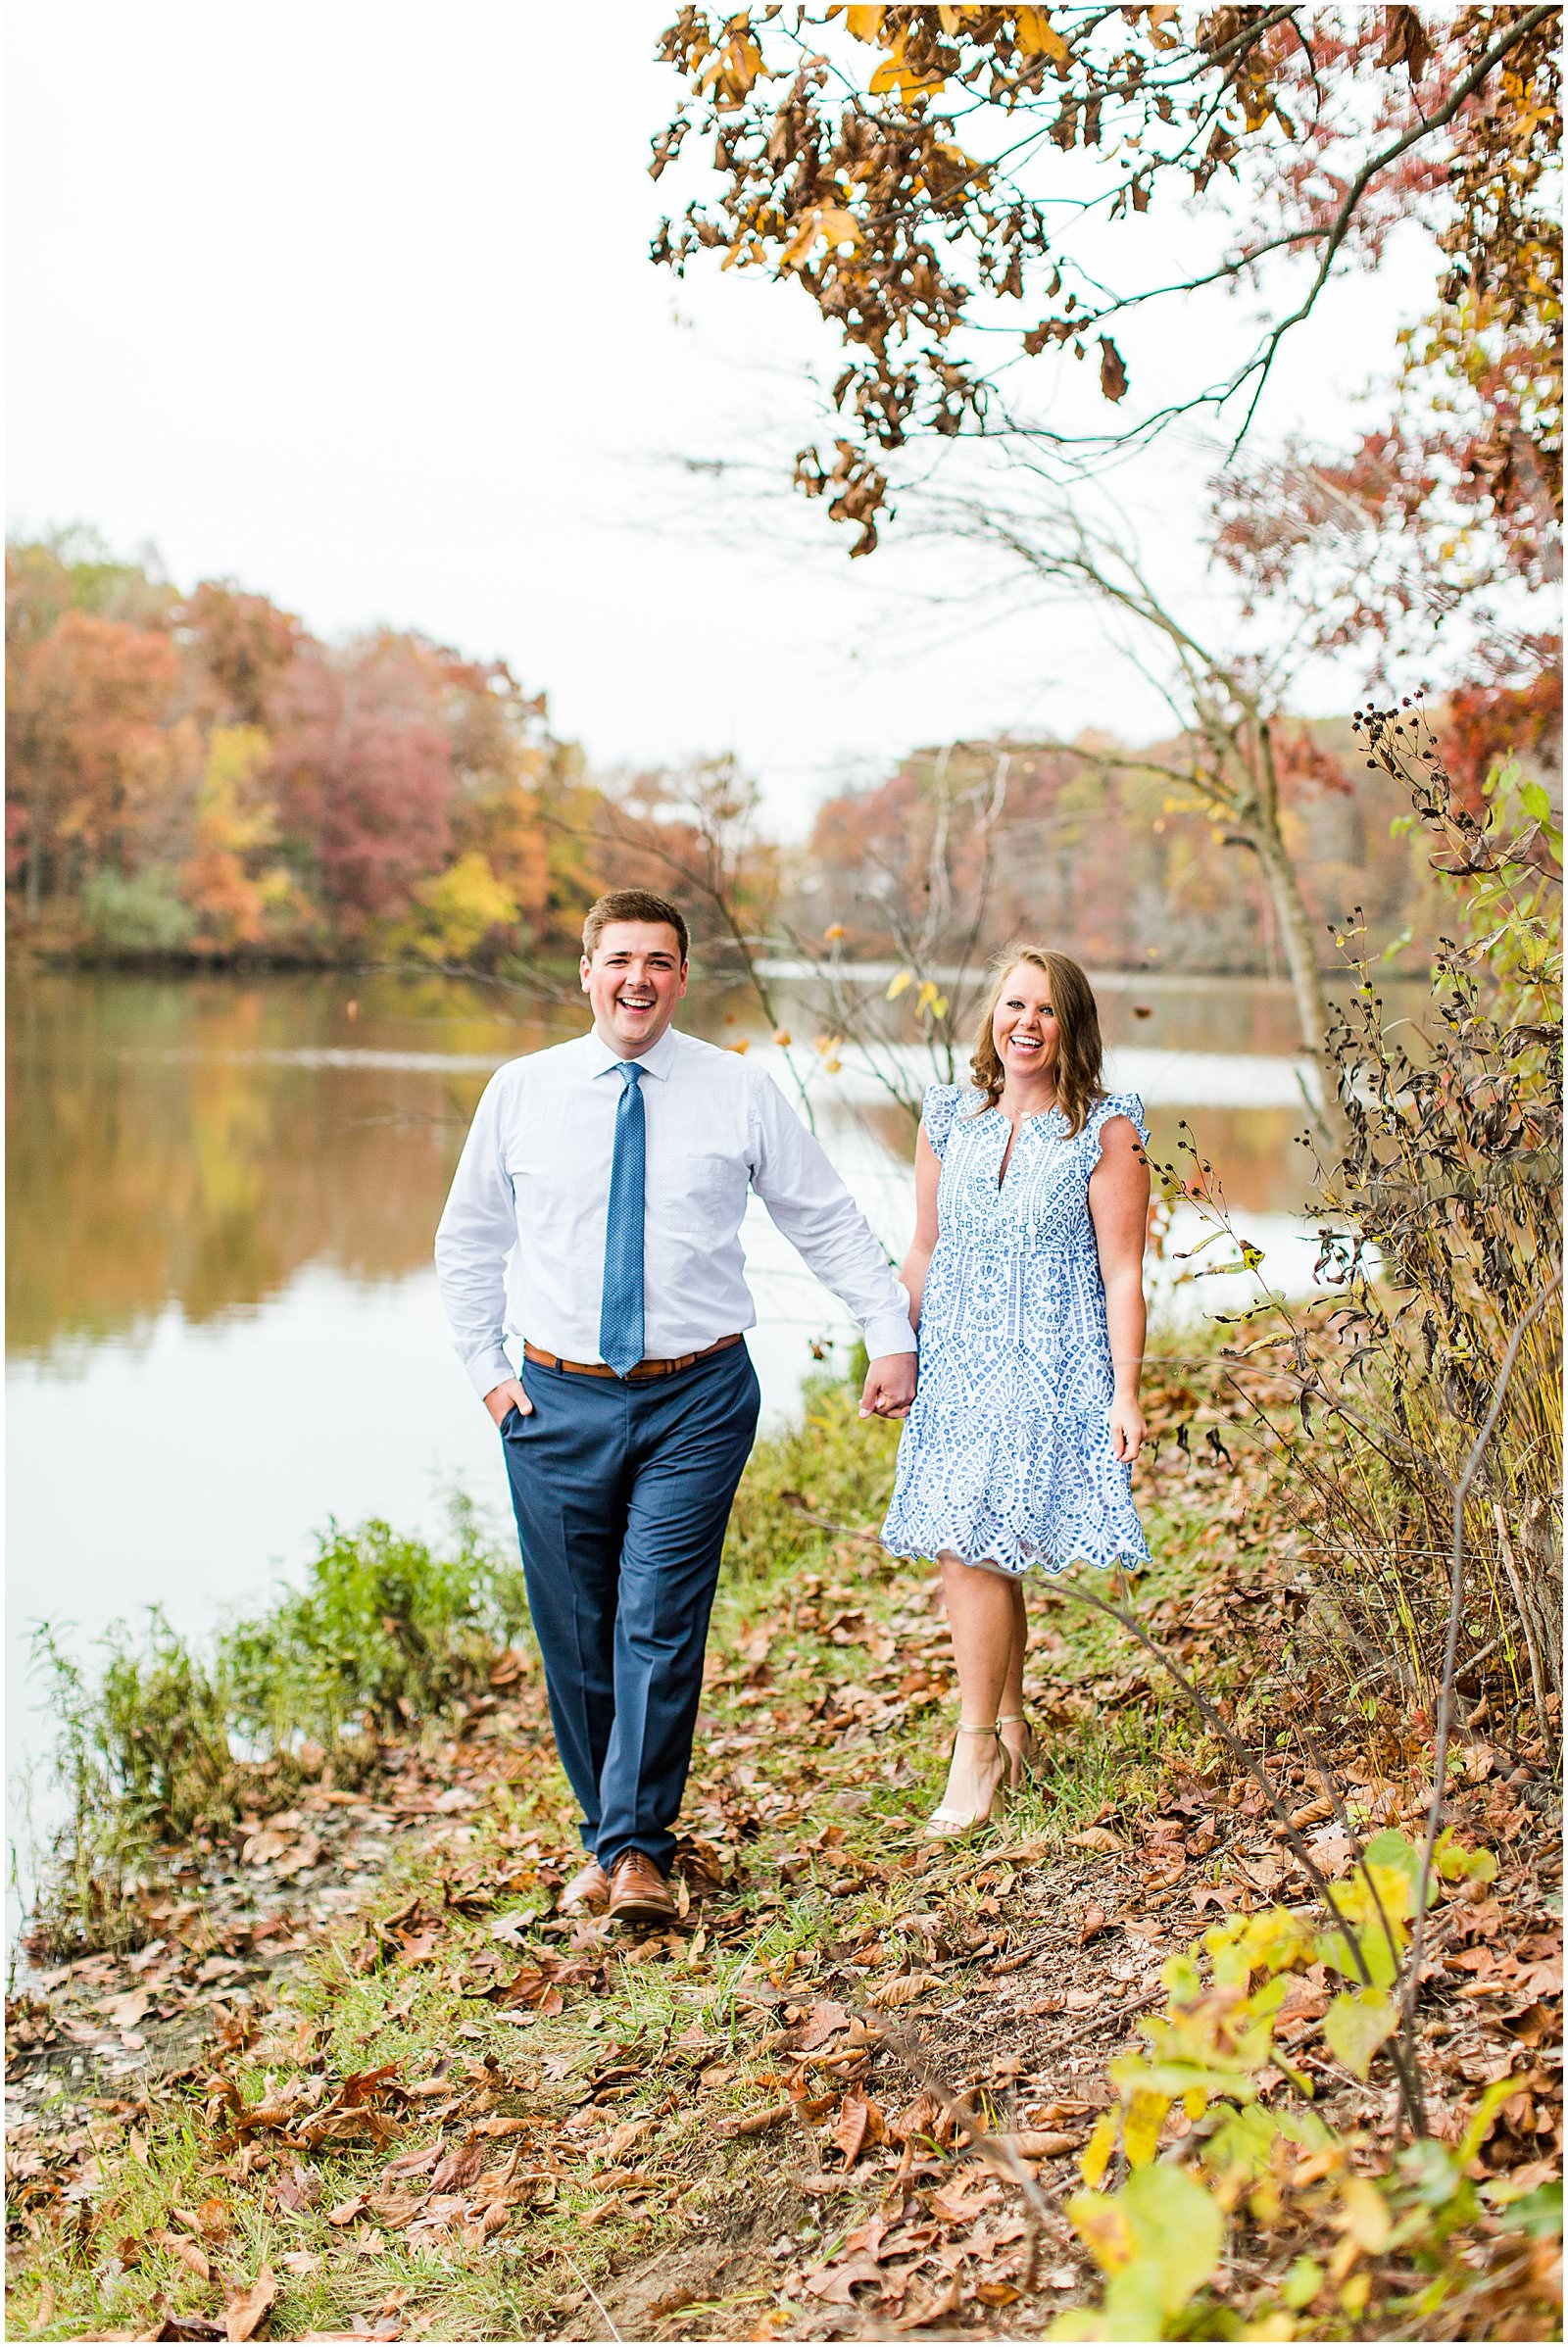 A Southern Illinois Engagement Session | Roxanne and Matthew | Bret and Brandie Photography 0010.jpg